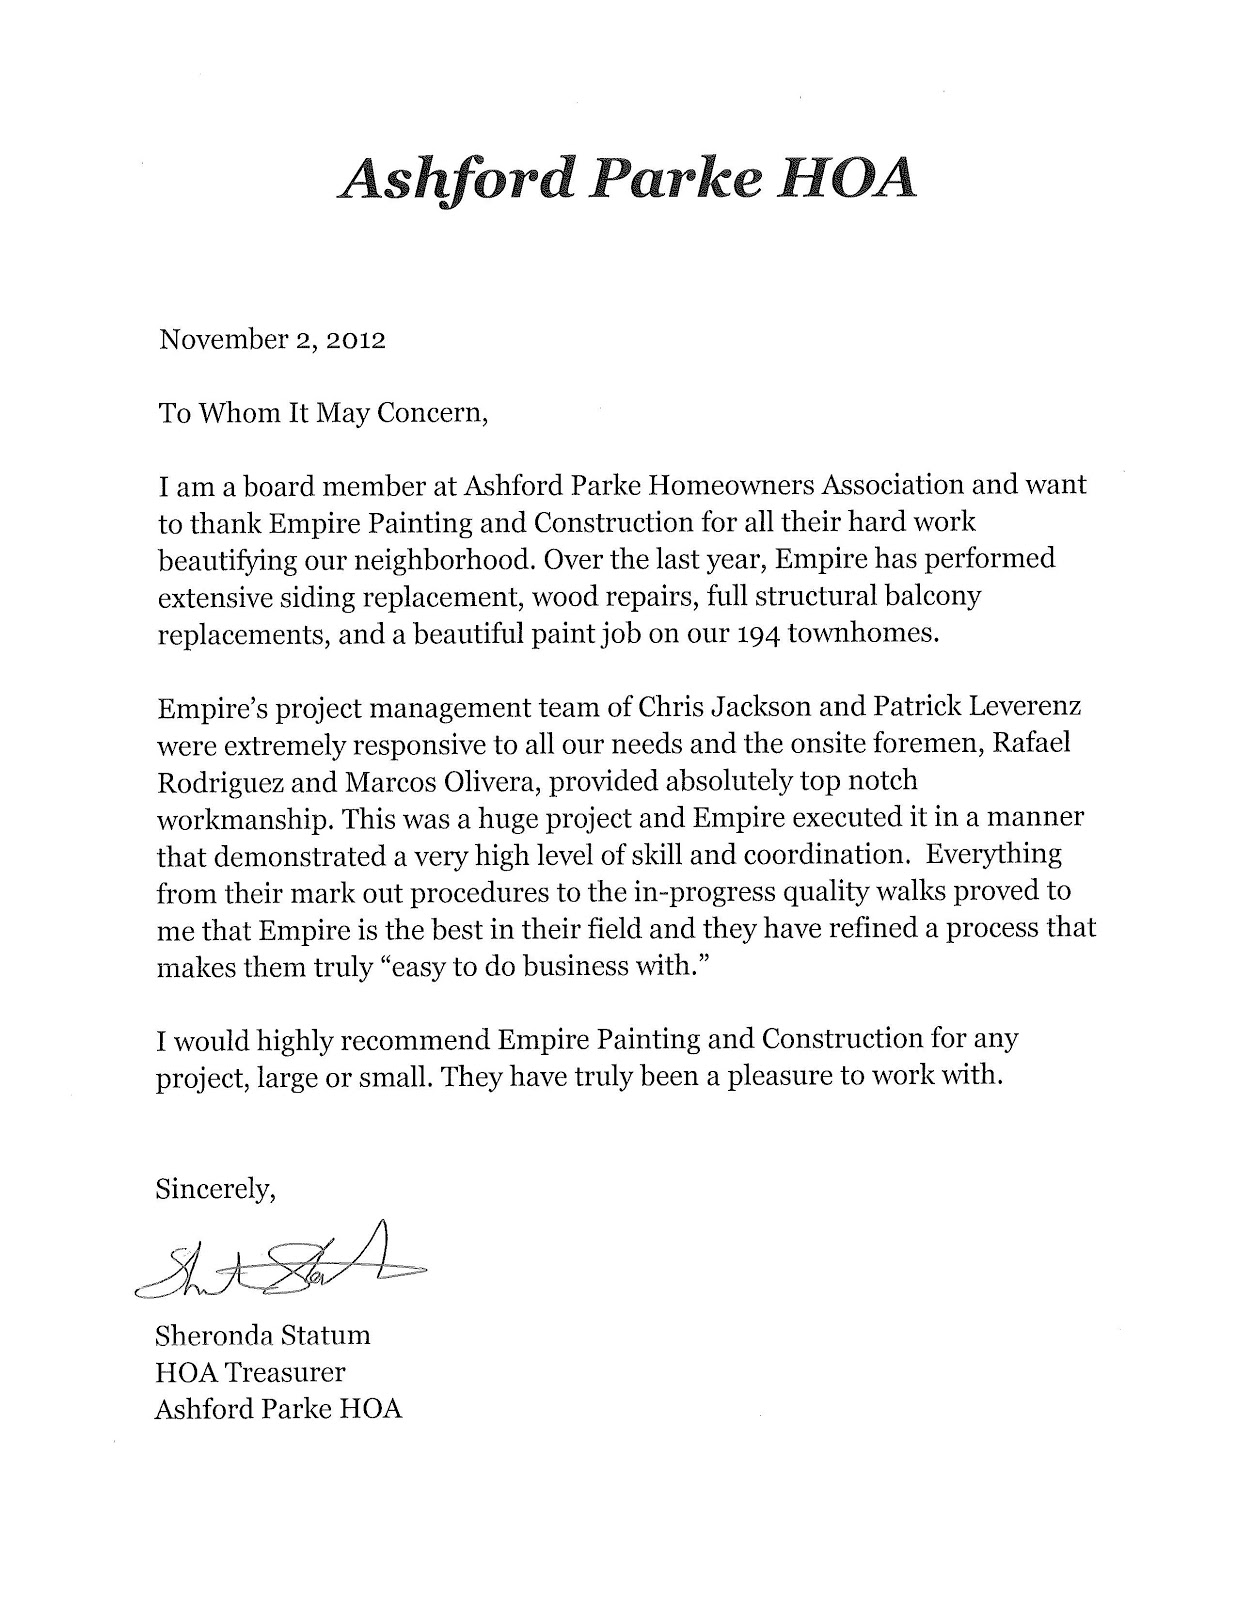 empireworks-reviews-and-resources-ashford-park-hoa-reference-letter